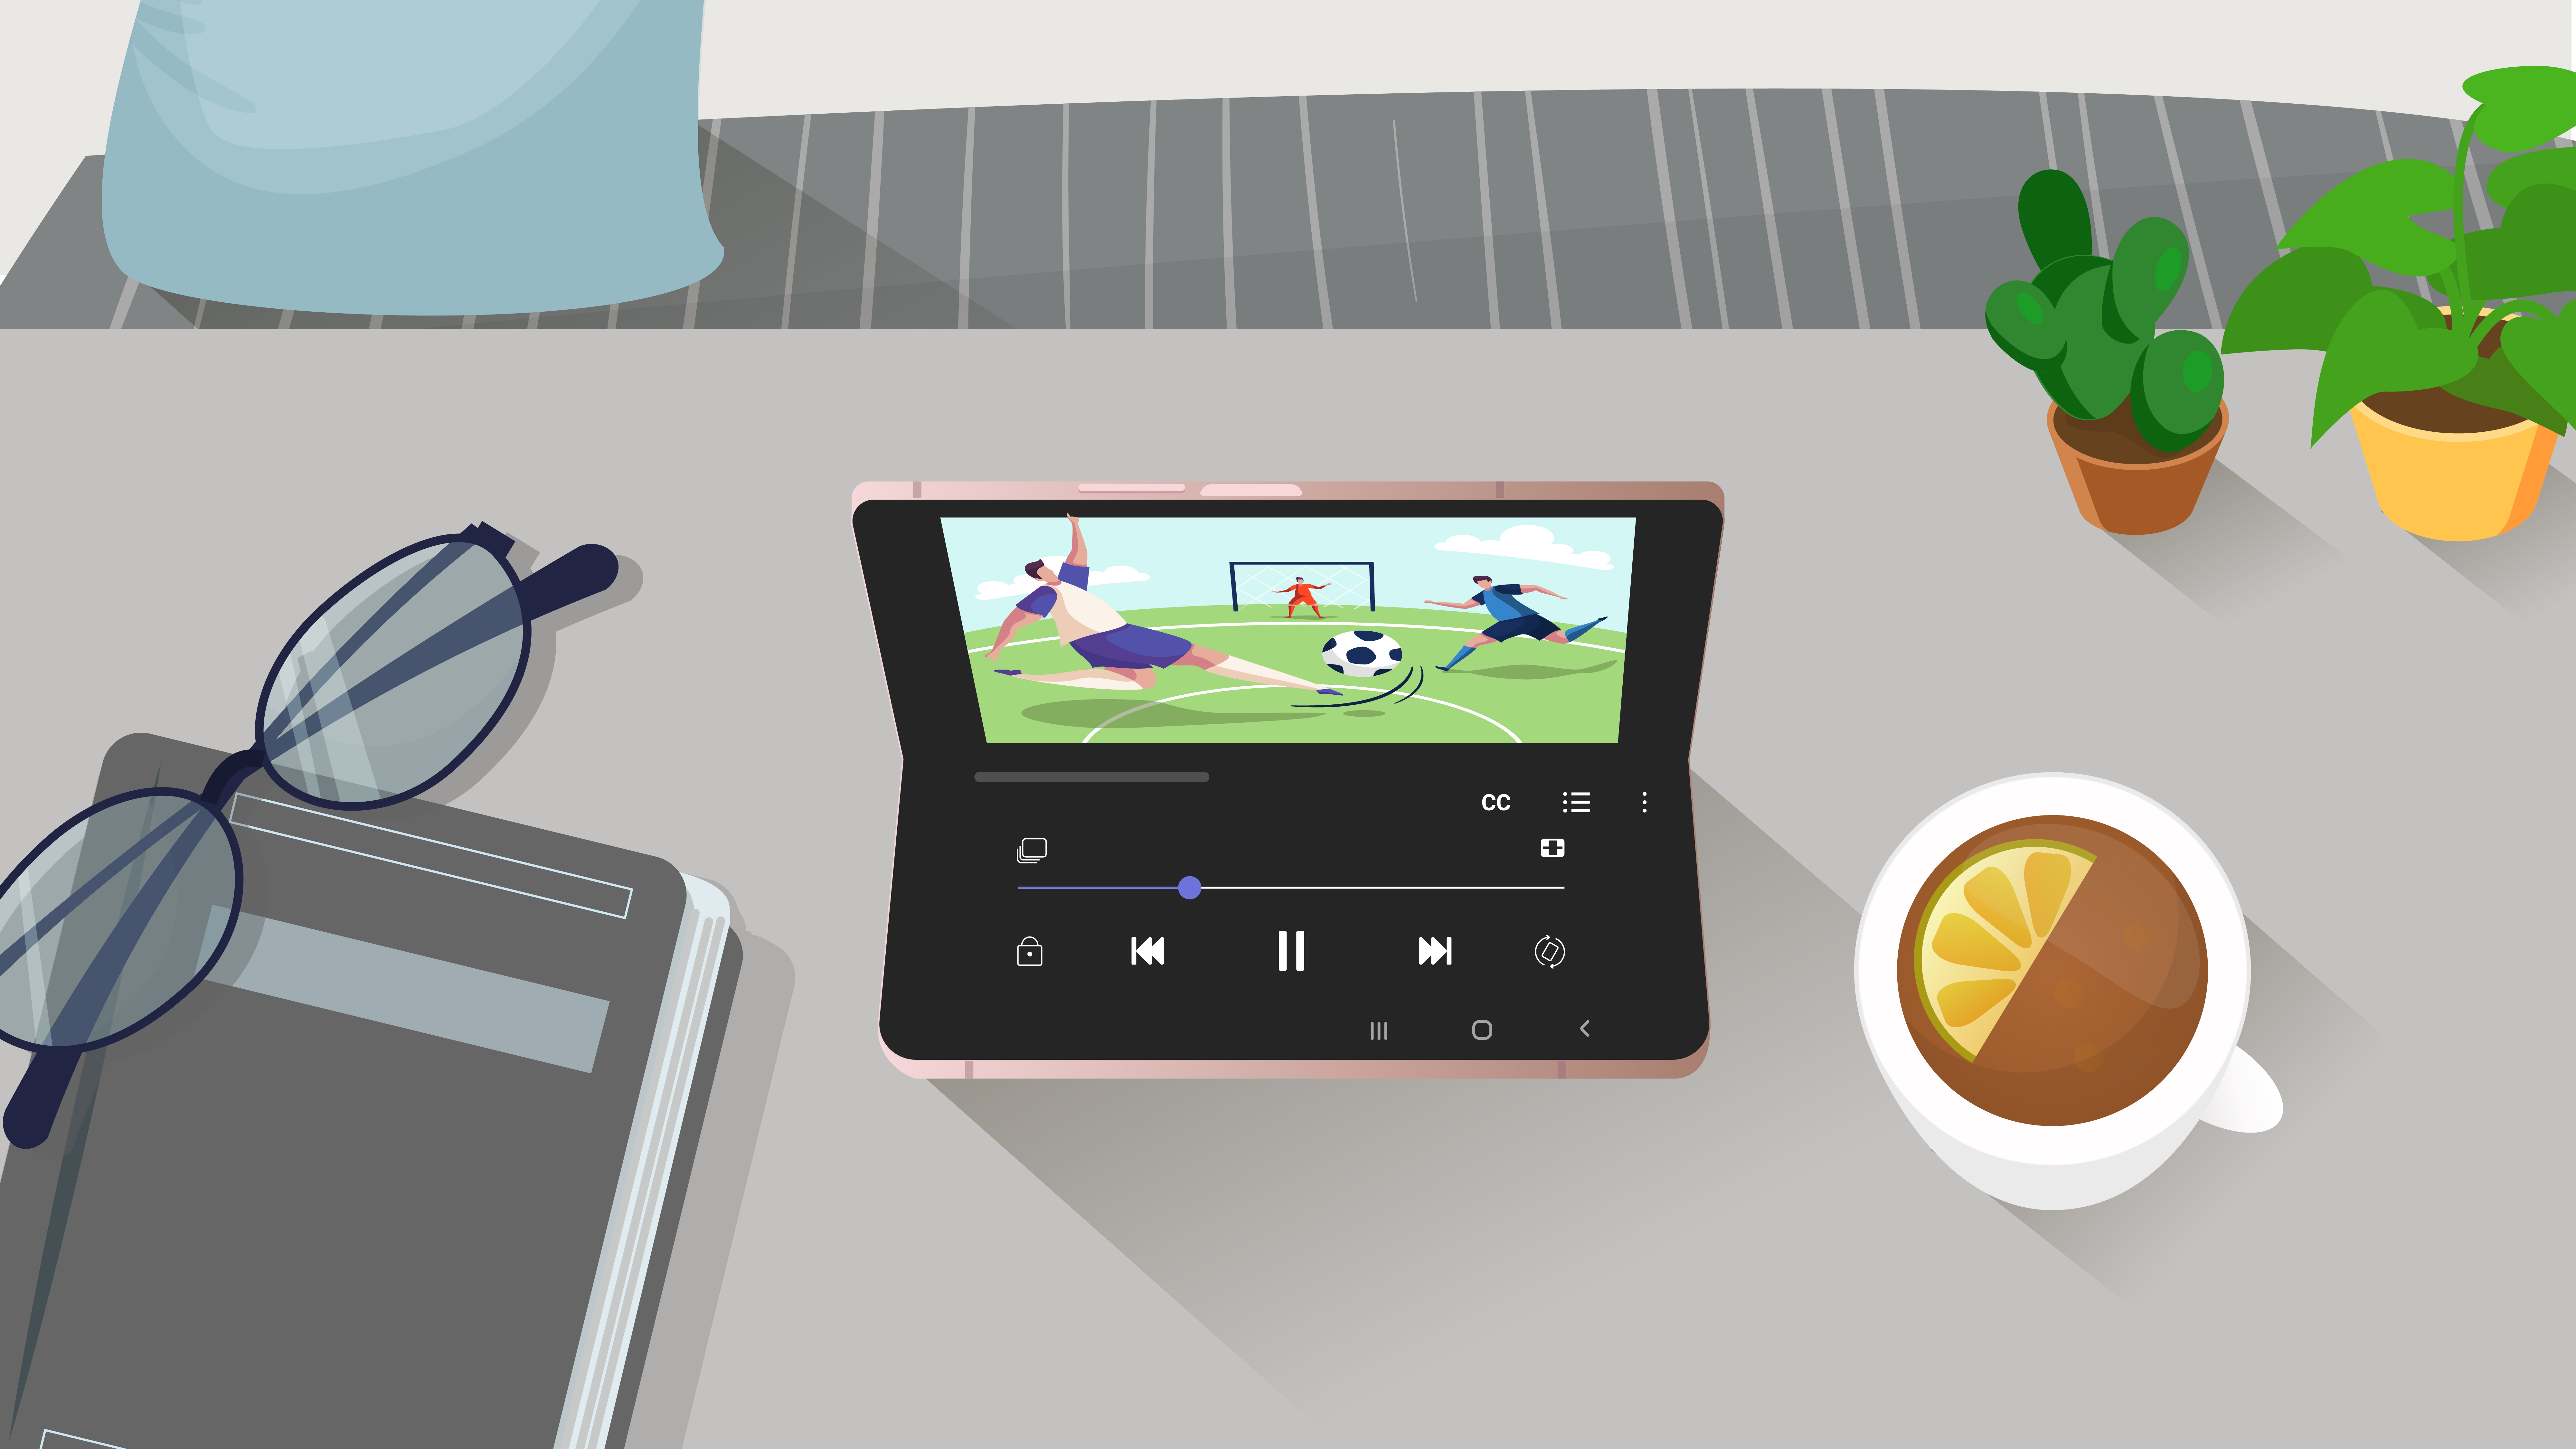 An illustration with a Galaxy Z Fold2 open in a flex mode showing a soccer game on the screen the phone is propped open on a gray table with a cup, notebook, glasses and plants